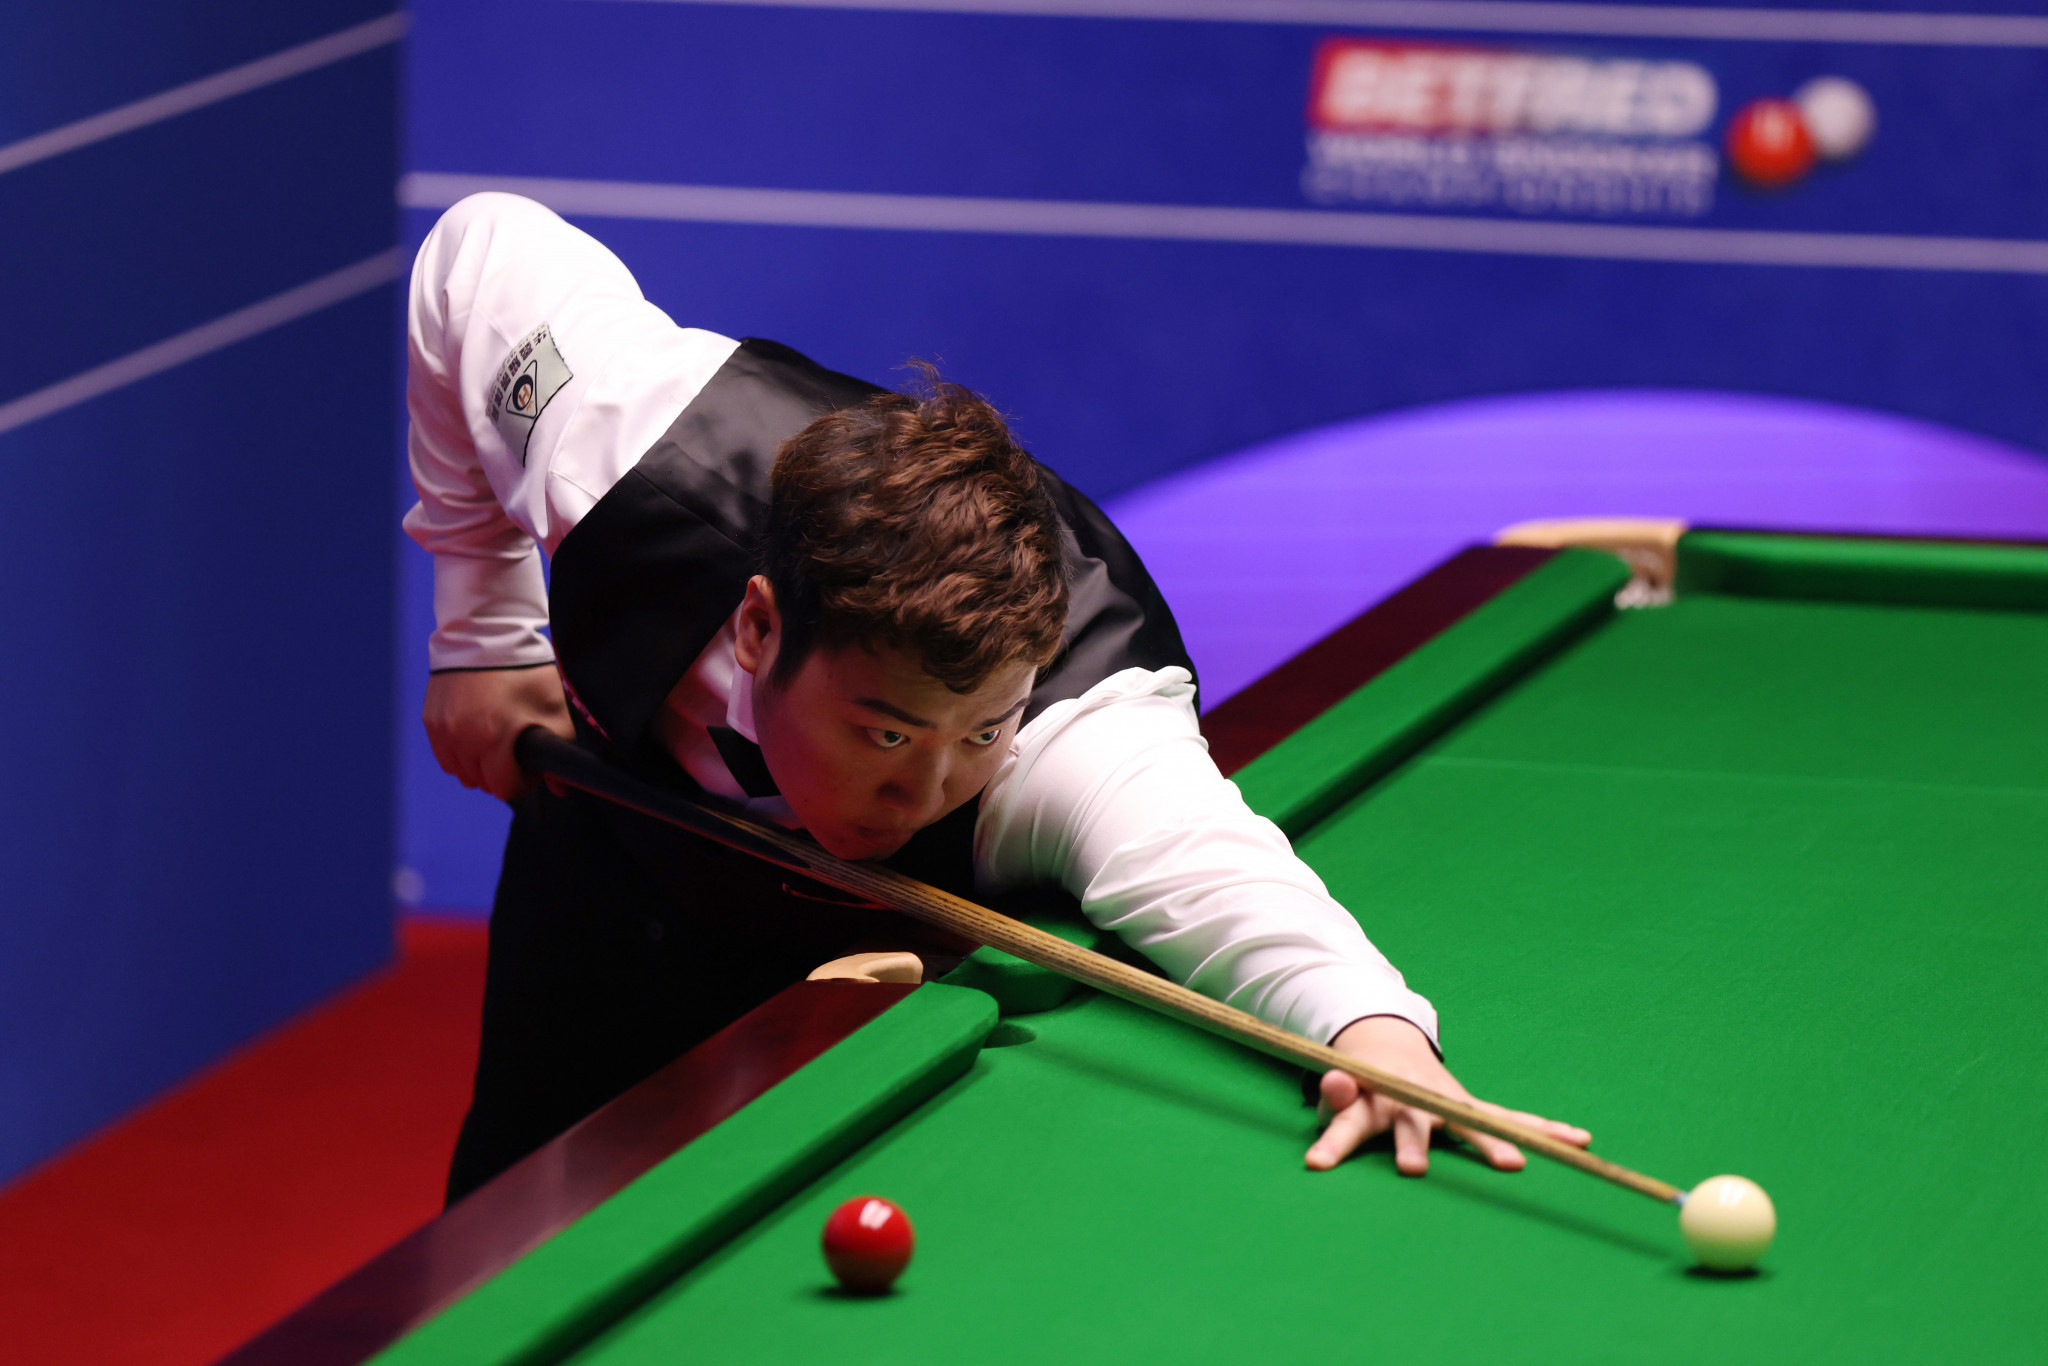 Bingtao and Williams deadlocked heading into final session of World Snooker Championship quarter-final